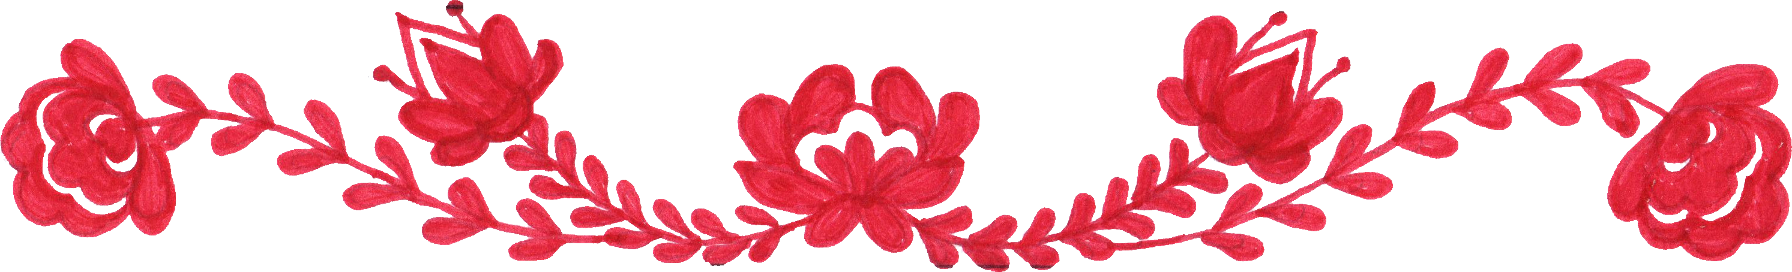 Free Download - Red Floral Border Png (1792x272)